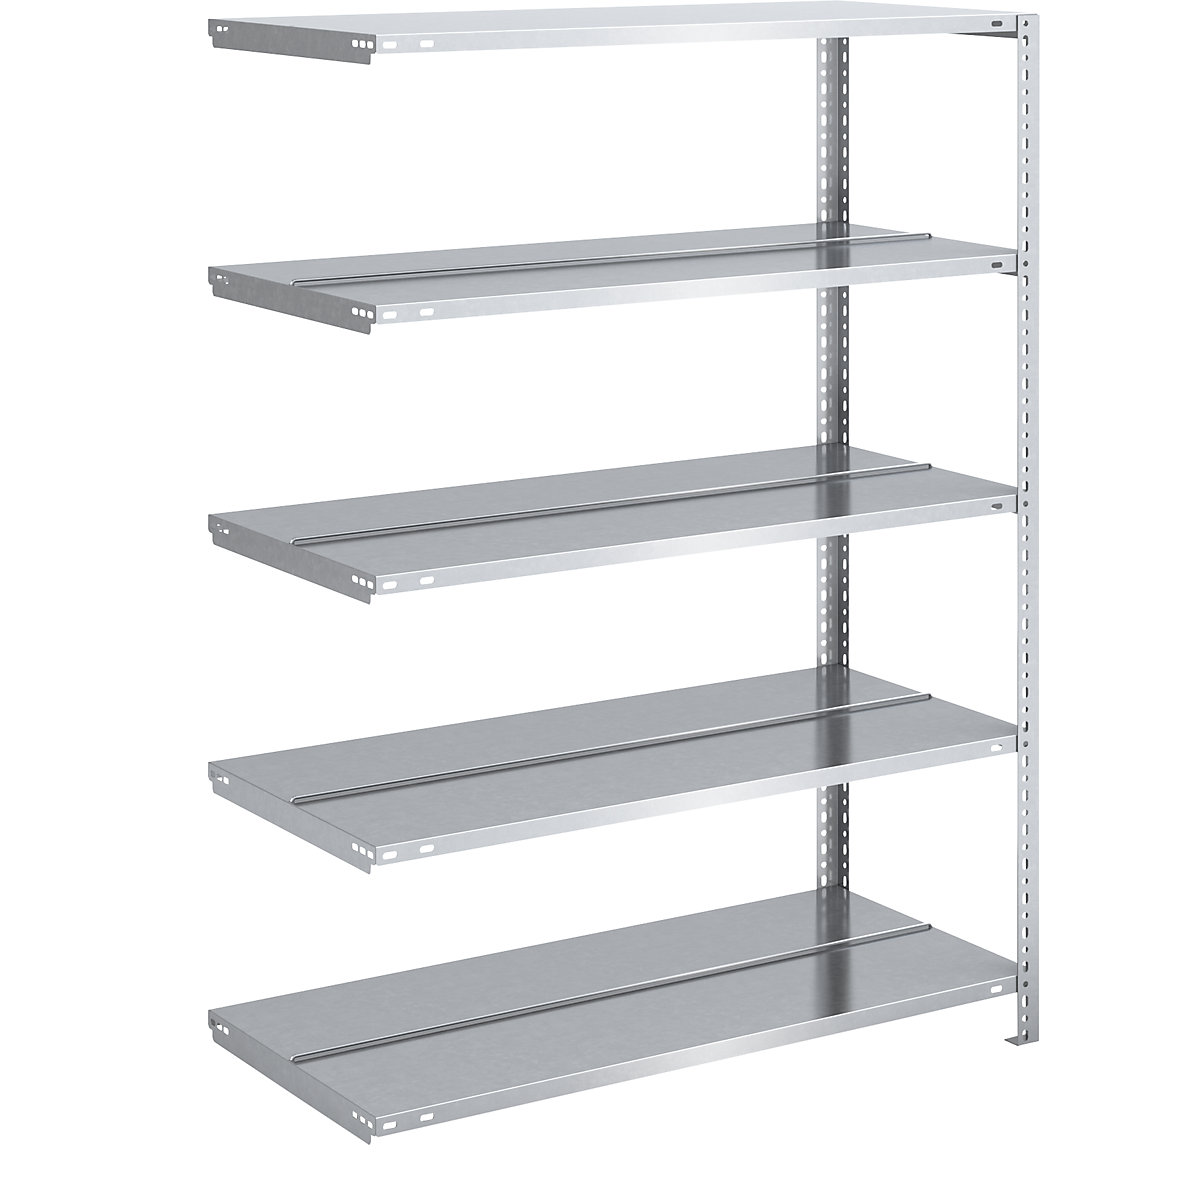 Bolt-together archive shelving, zinc plated – hofe, shelf height 1500 mm, double sided, extension shelf, width x depth 1000 x 600 mm-3